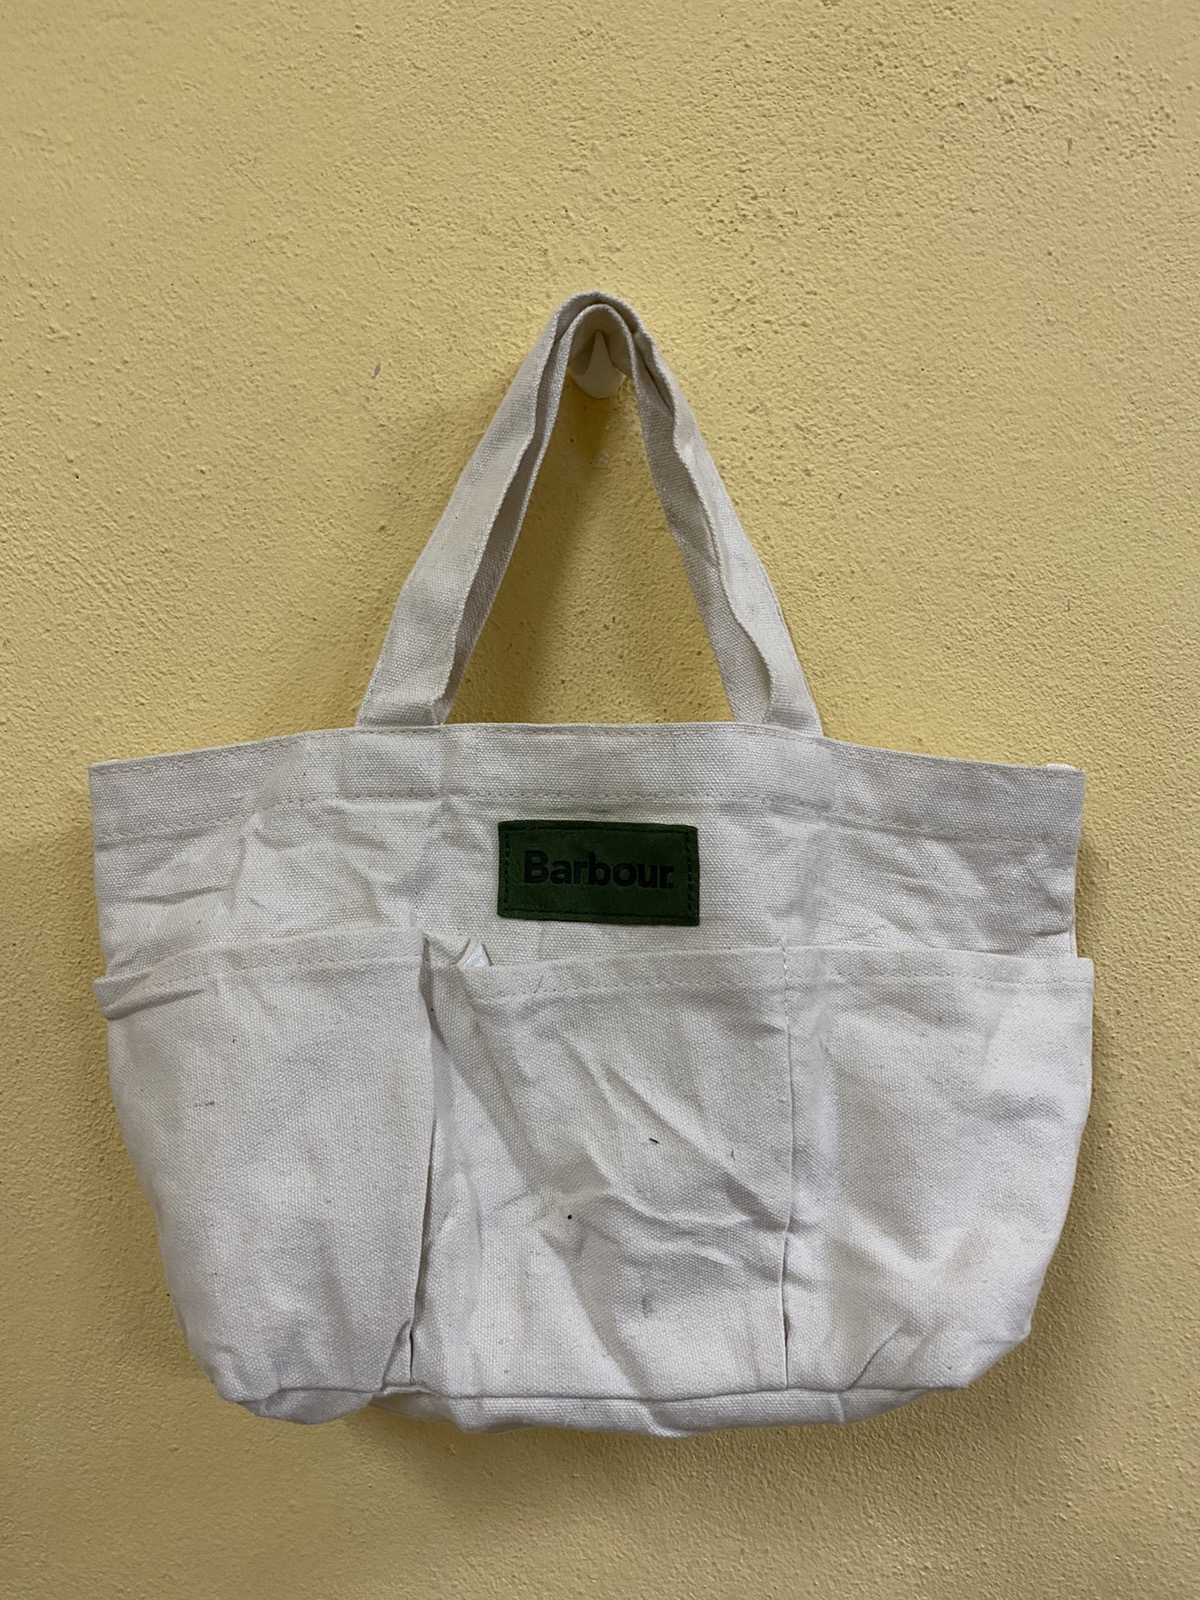 Steals💥 Barbour Tote Bag - 1